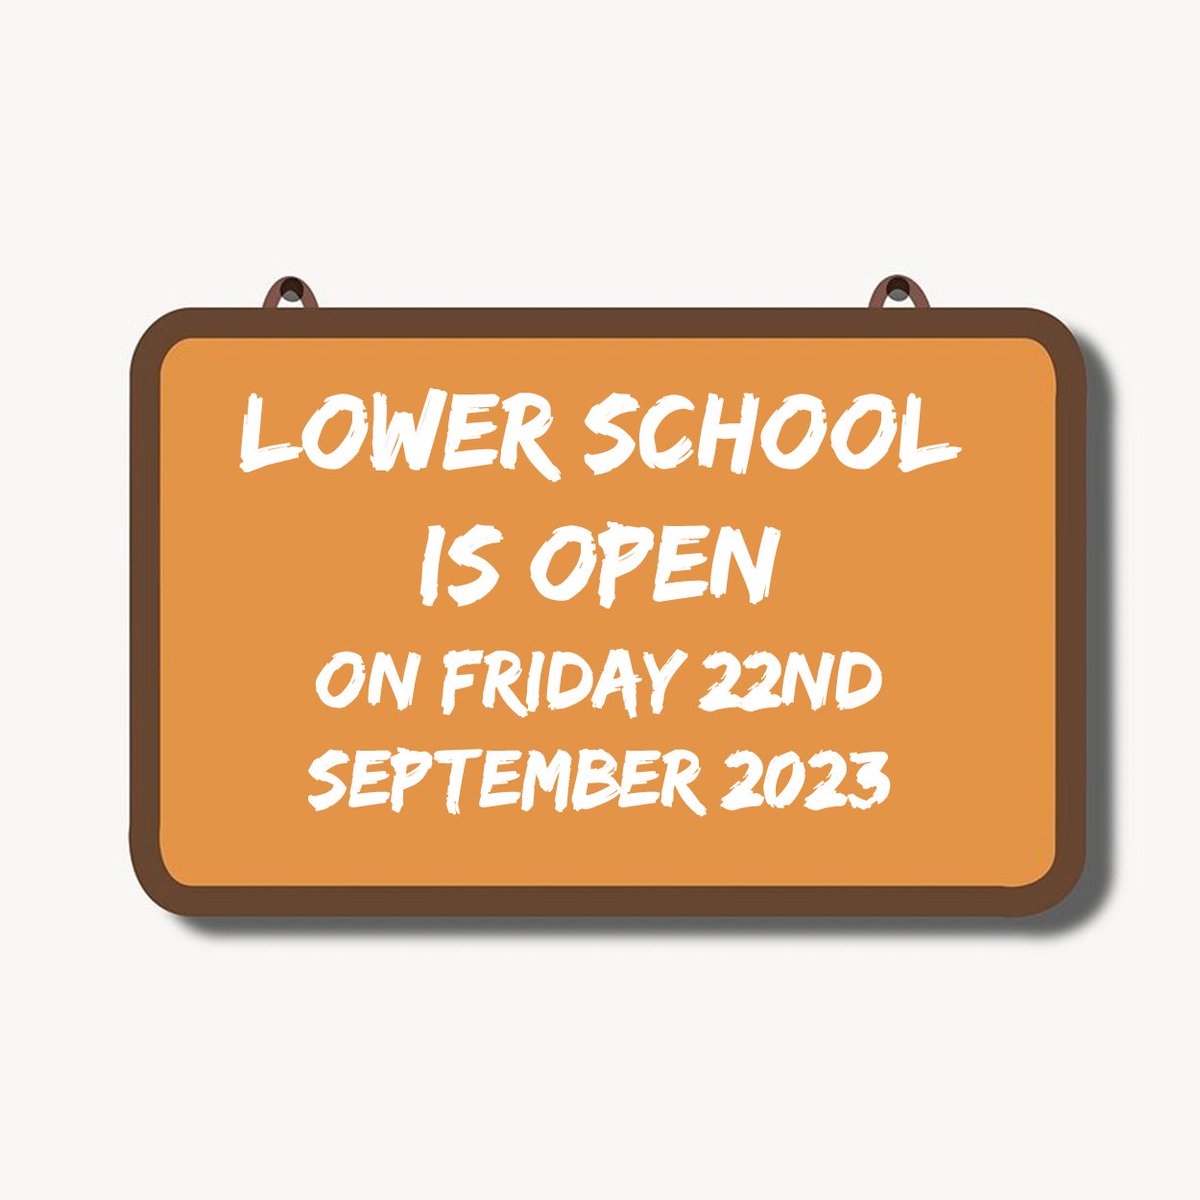 LOWER SCHOOL WILL BE OPEN TOMORROW (FRIDAY 22ND SEPT 2023) After the closure today due to heavy rain & consequent flooding, electricians & safety experts have assessed the situation & we are pleased to announce school will be open tomorrow as normal. Thank you for your patience.